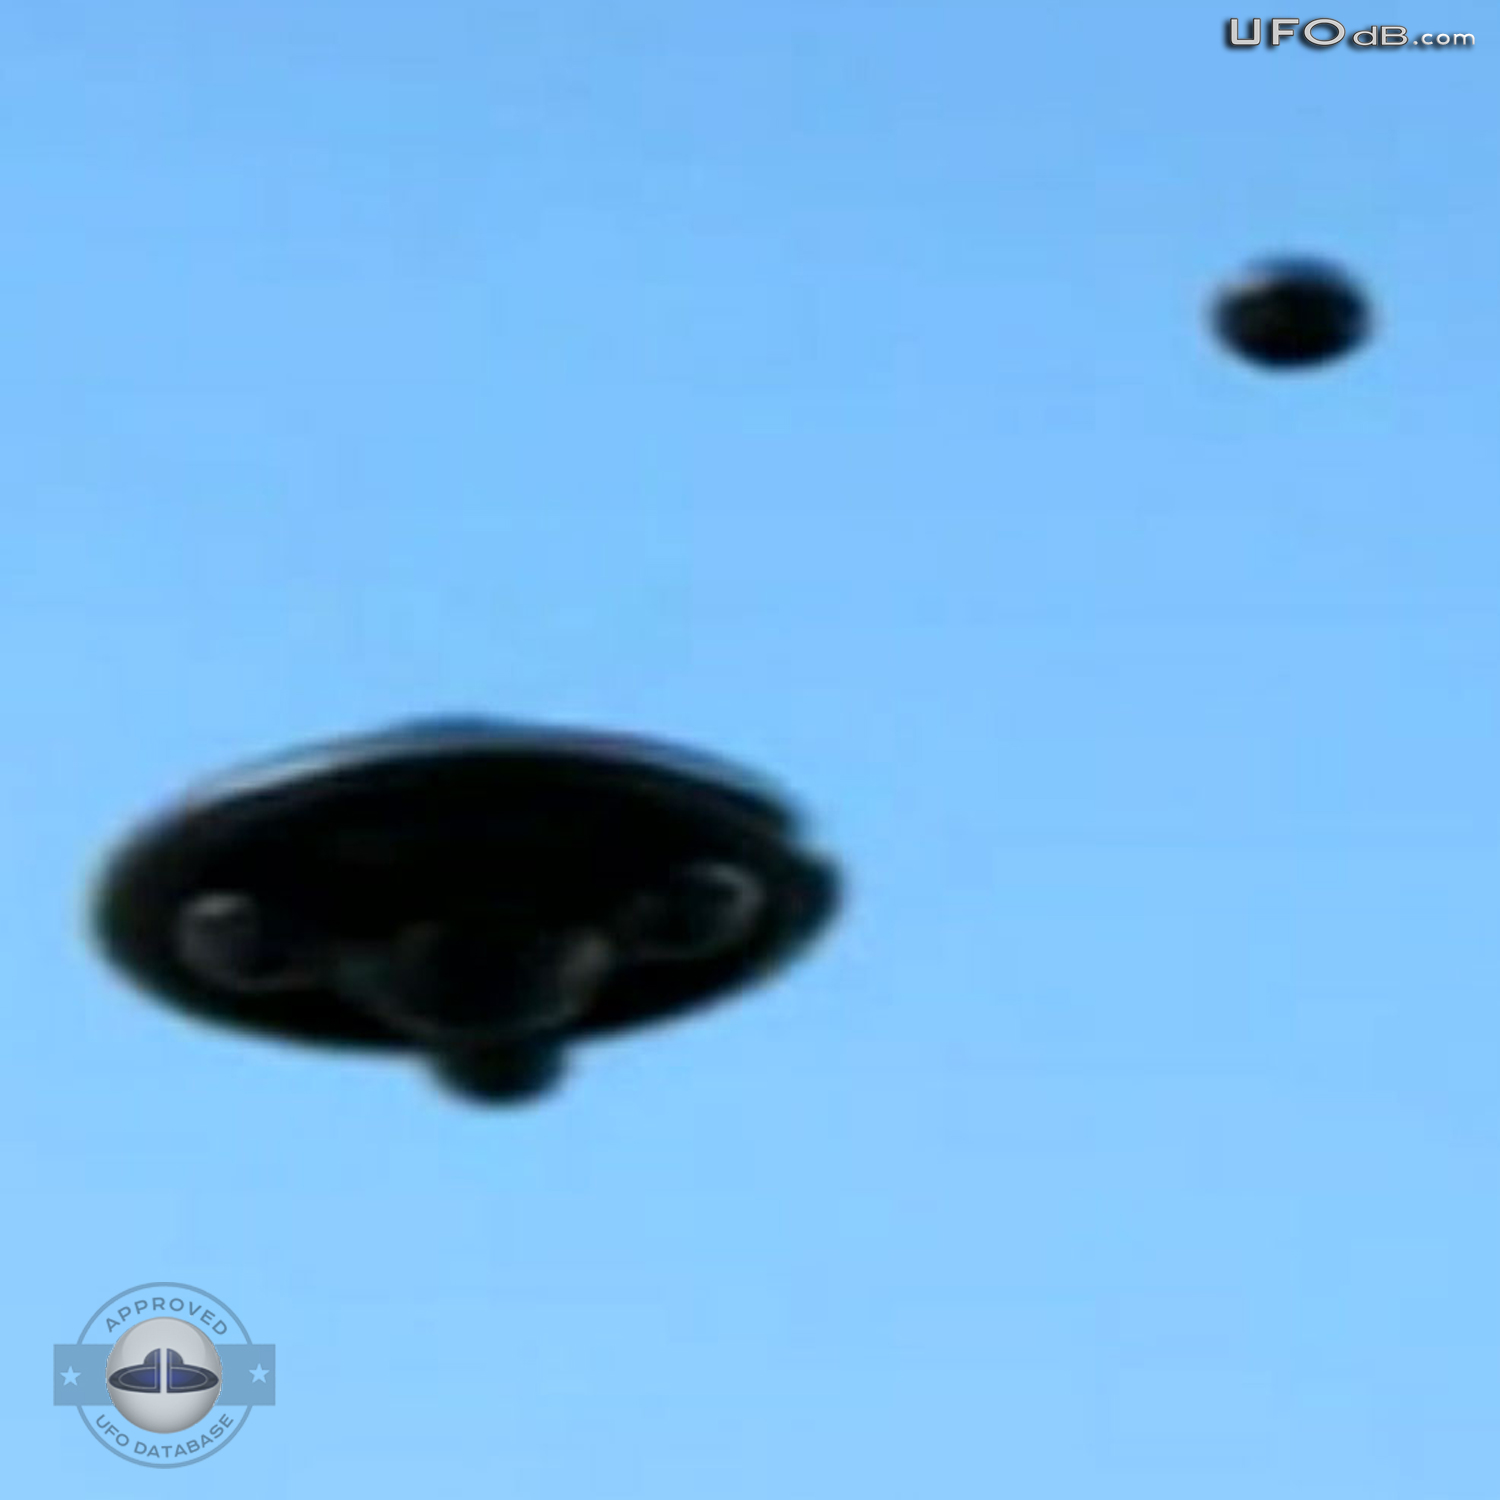 Italian UFO hunter captures on pictures a great 2011 UFO sighting UFO Picture #372-5